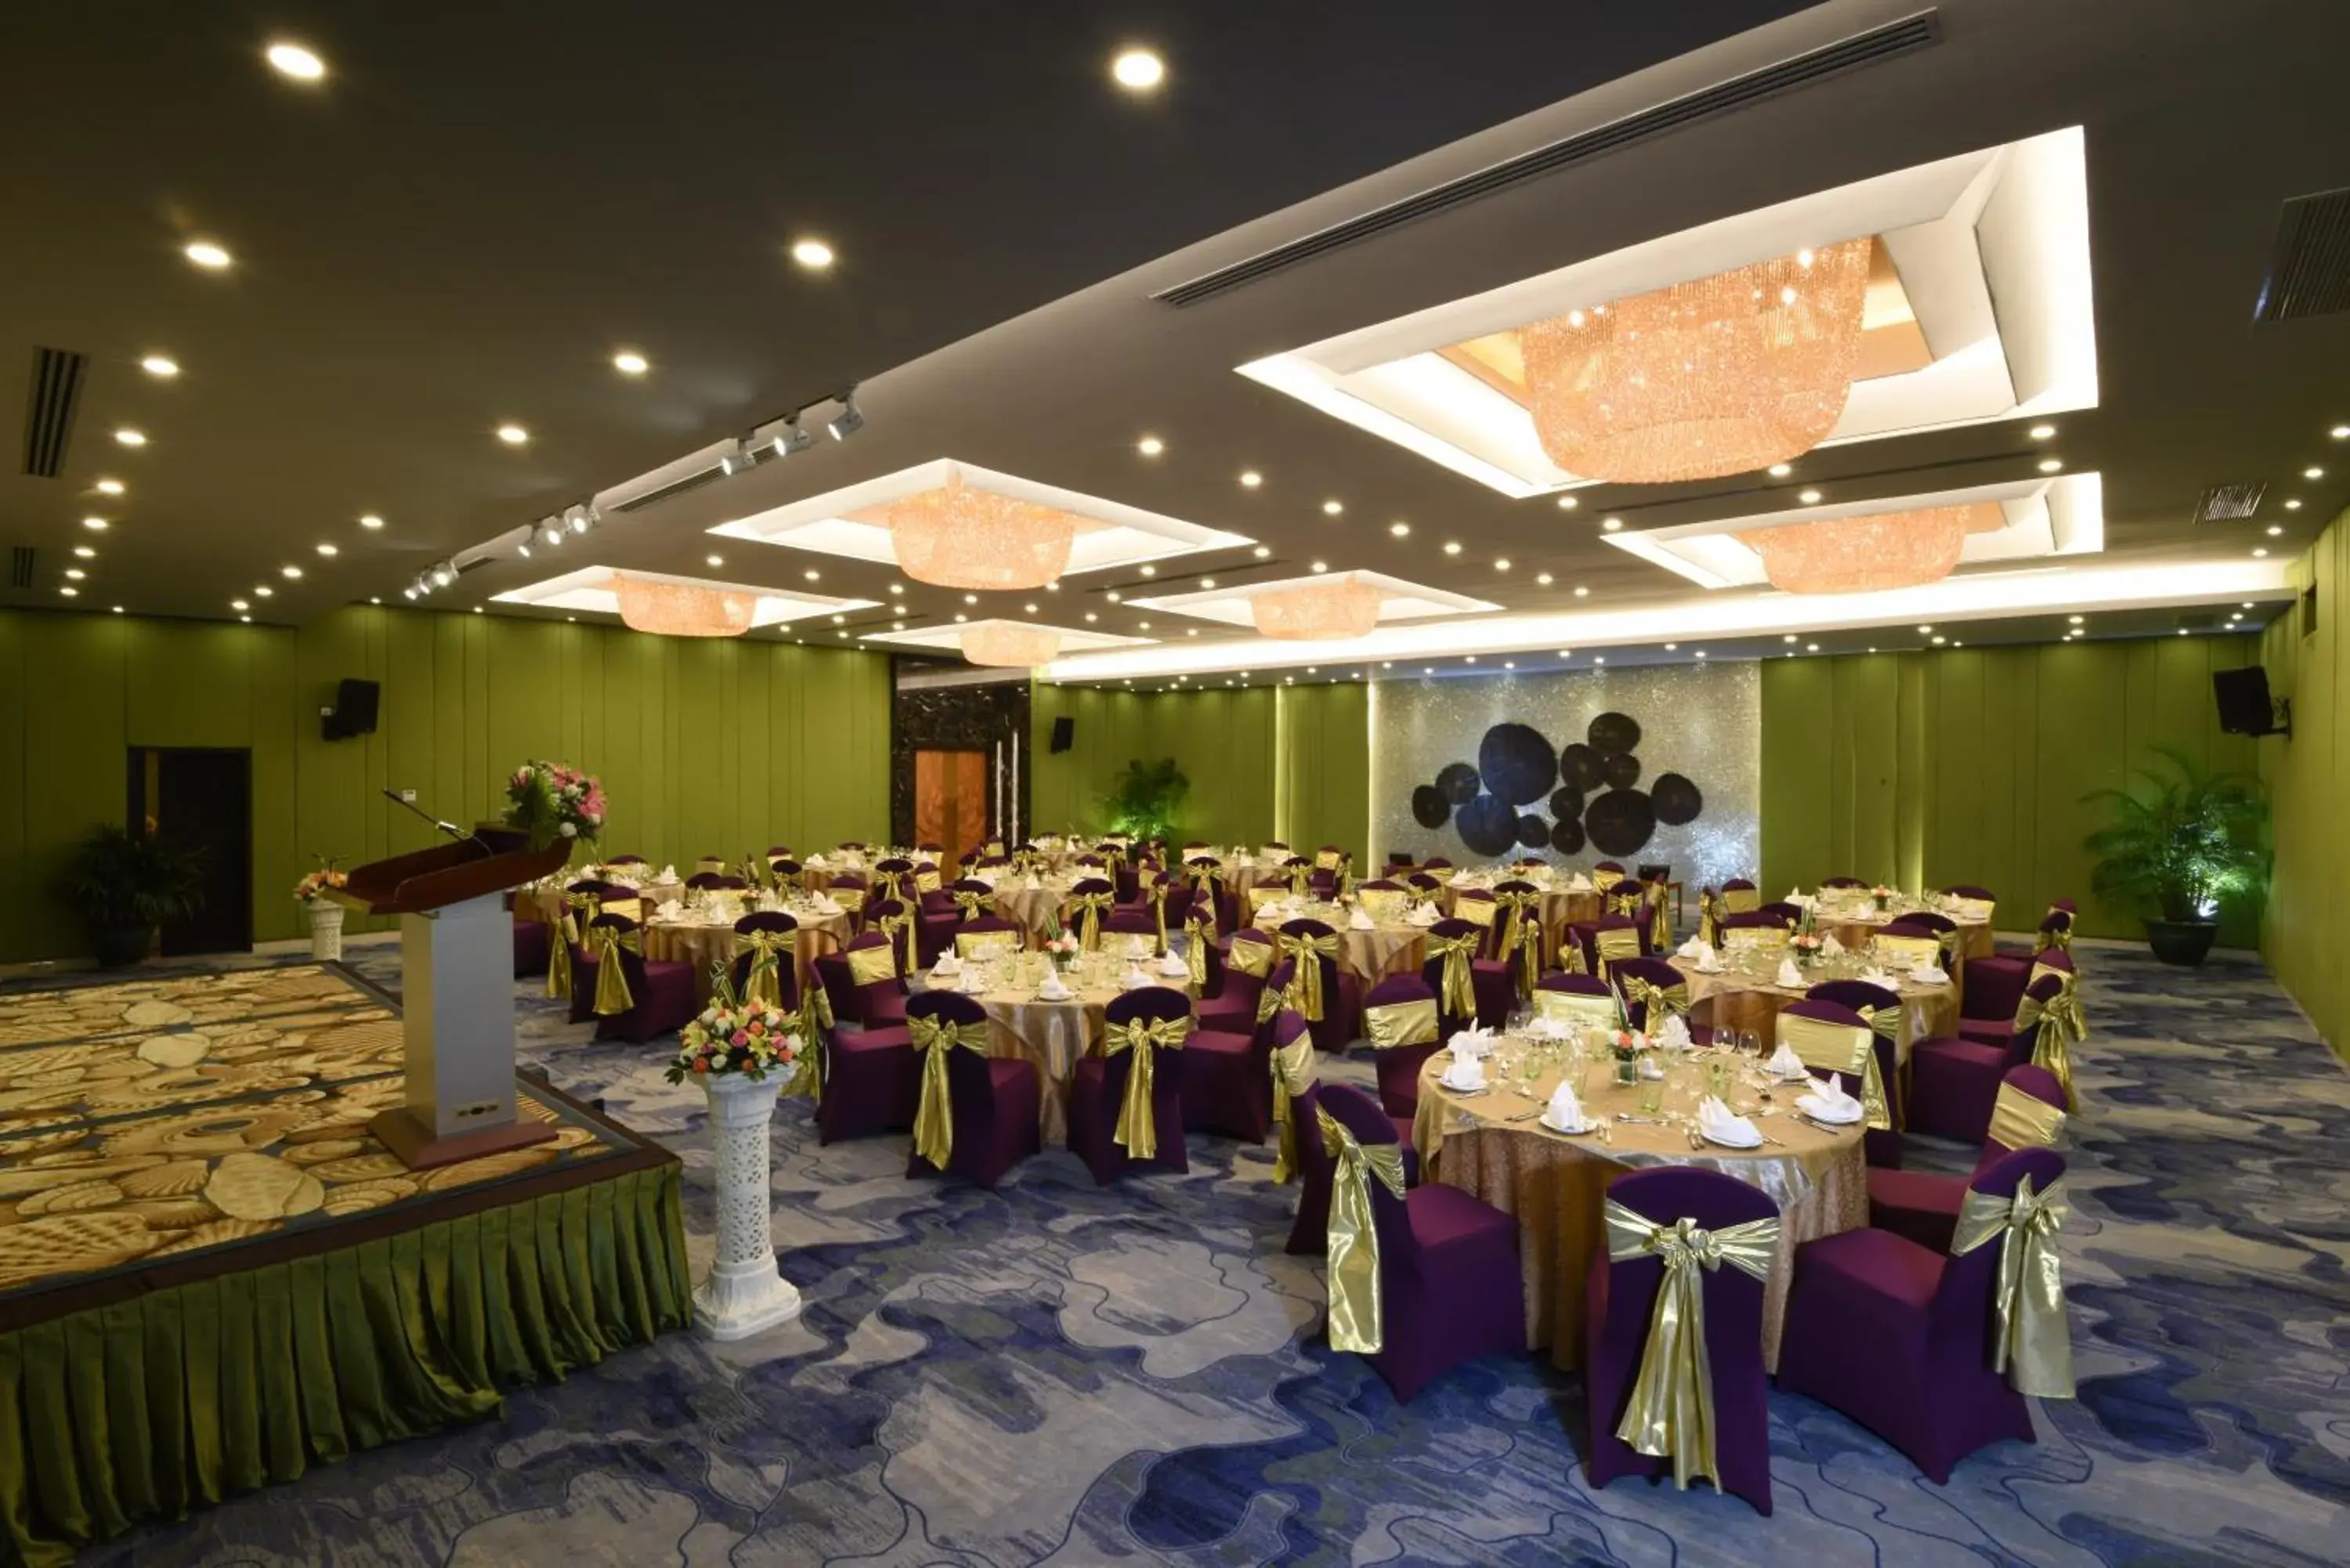 Banquet/Function facilities, Banquet Facilities in Best Western Green Hill Hotel